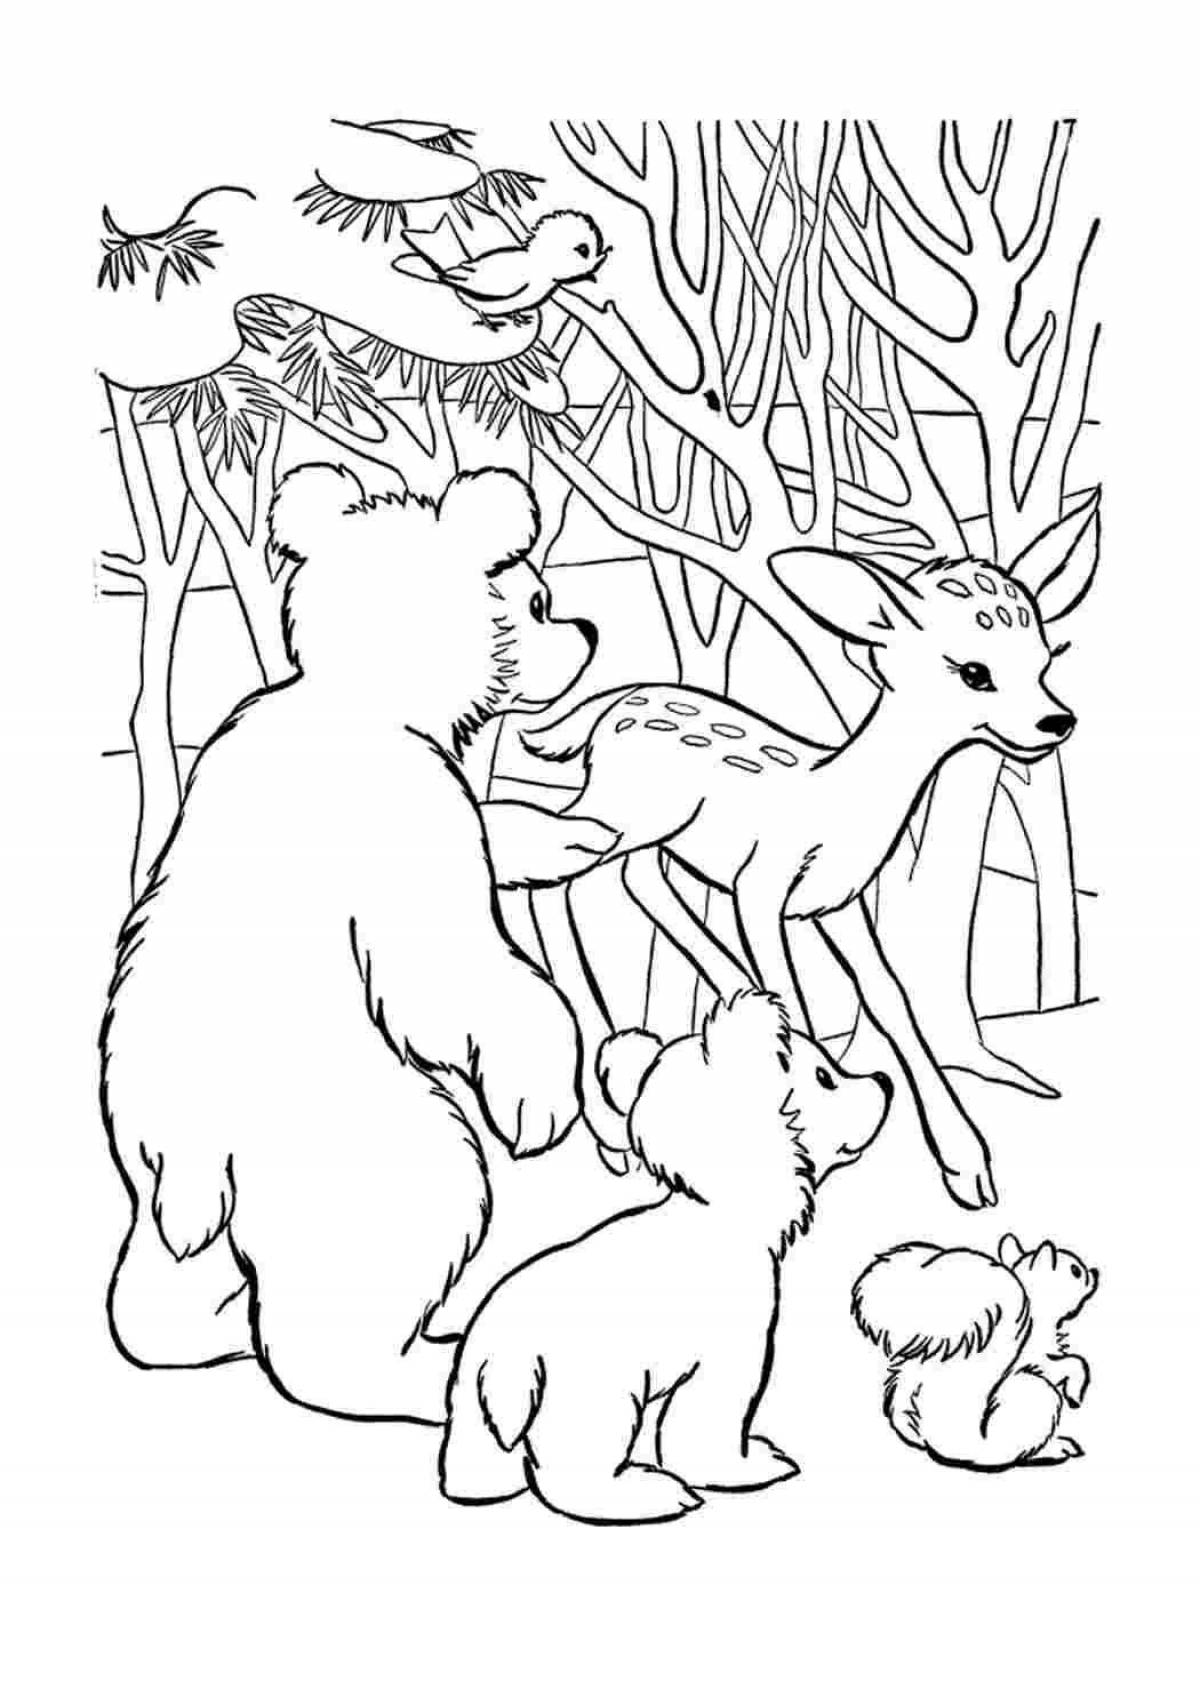 Radiant coloring page animals in winter